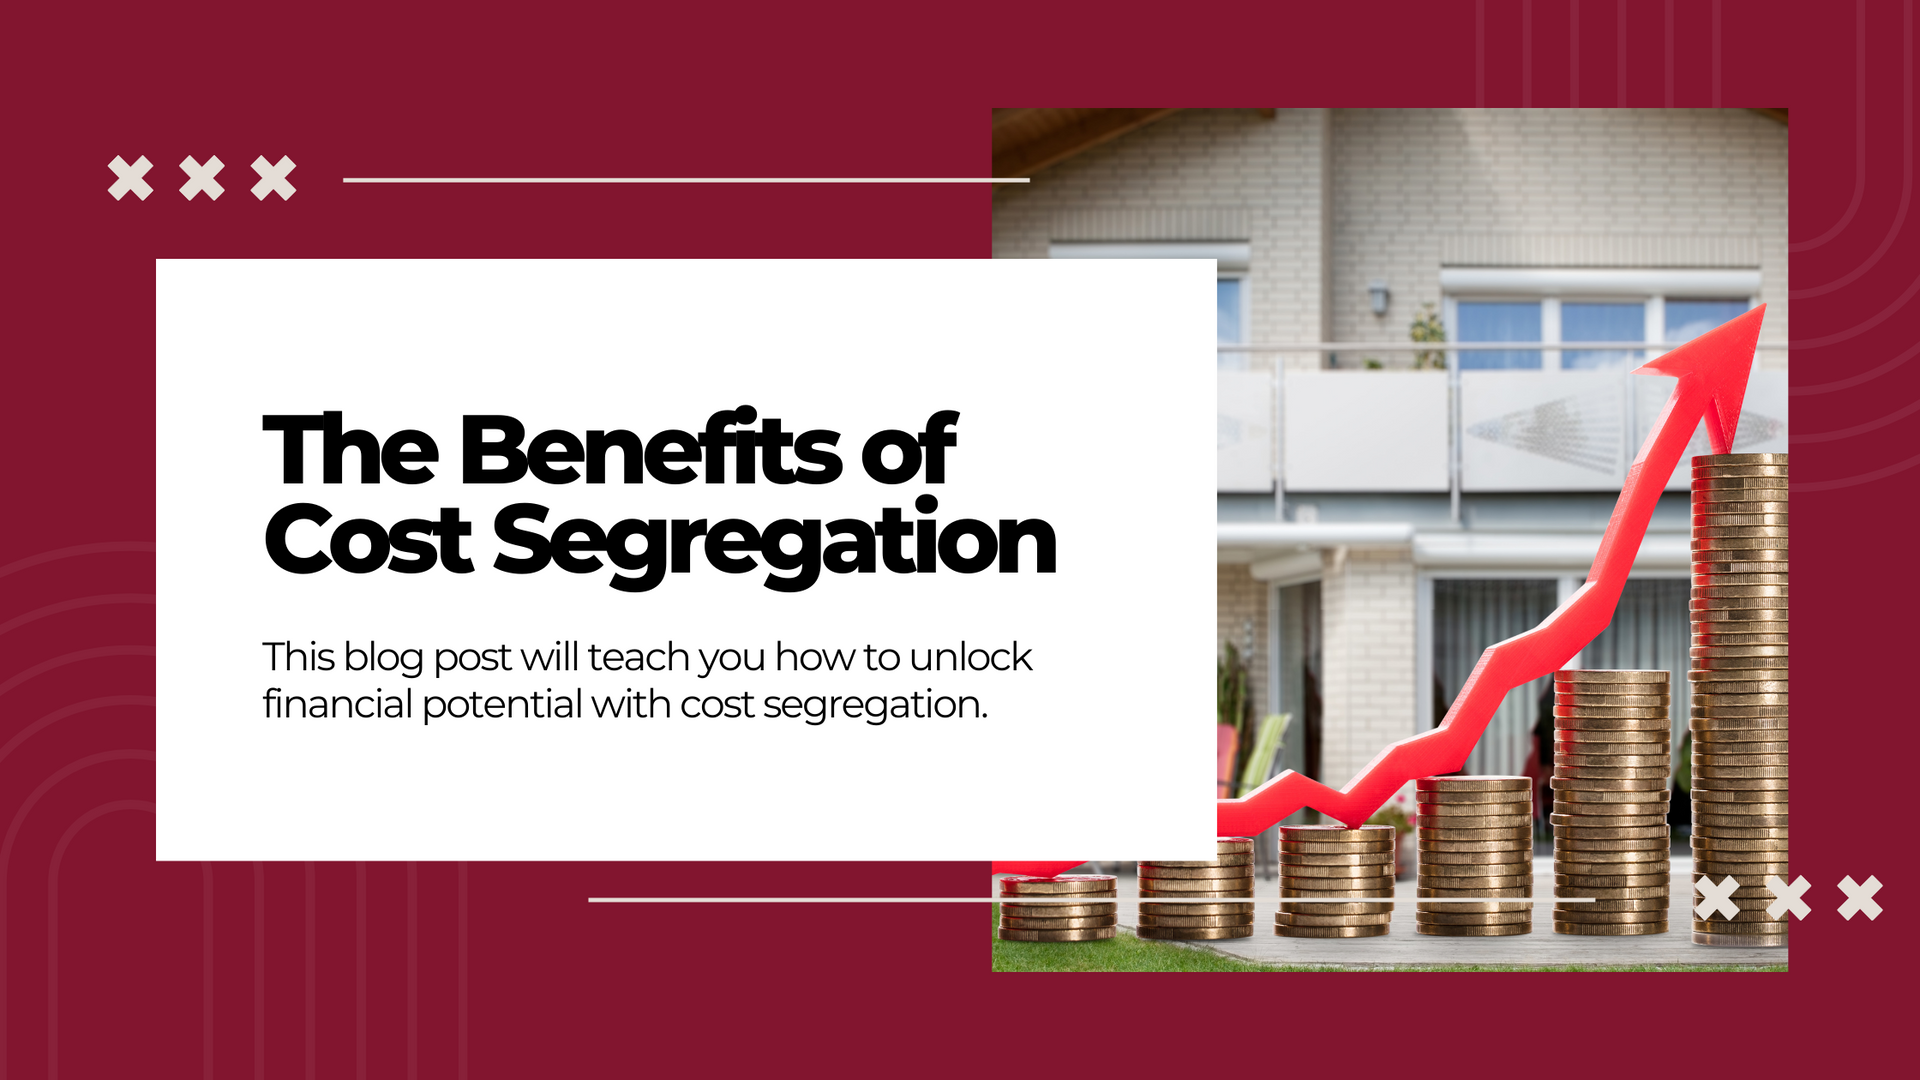 What are the Benefits of Cost Segregation?